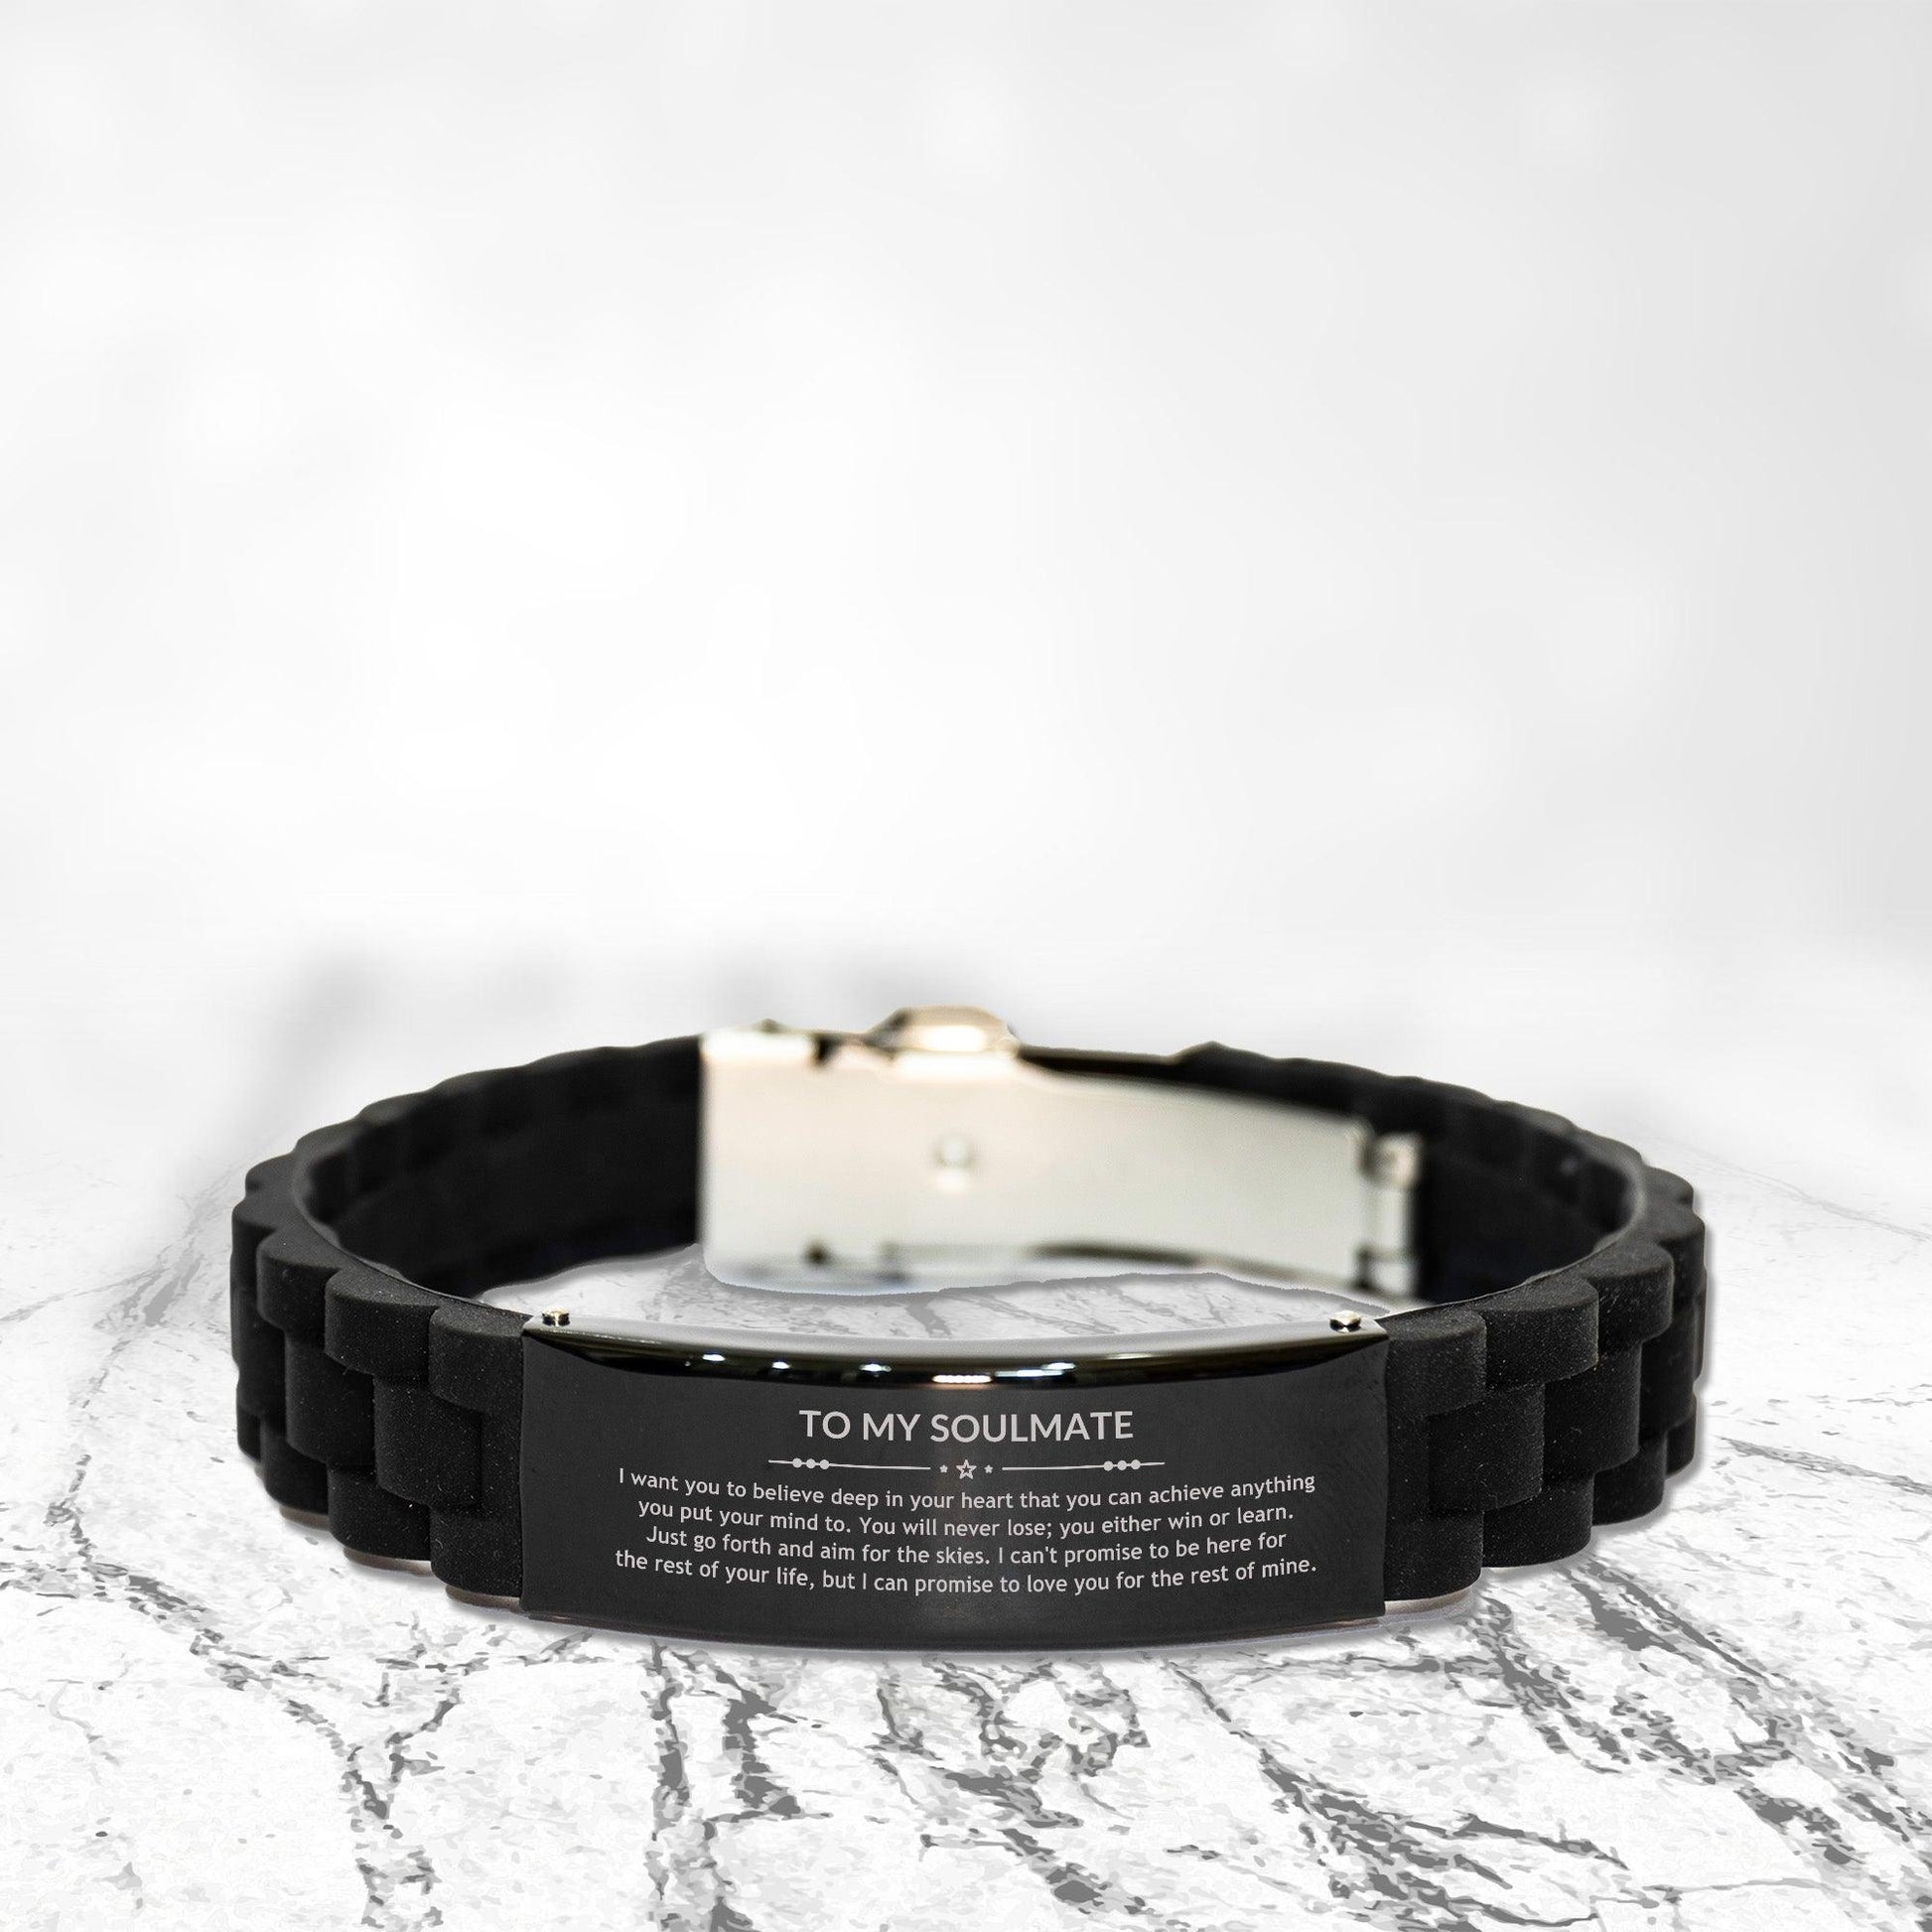 Inspirational Soulmate Engraved Black Glidelock Clasp Bracelet - Behind you, all your Memories, Before you, all your Dreams - Birthday, Christmas Holiday Gifts - Mallard Moon Gift Shop